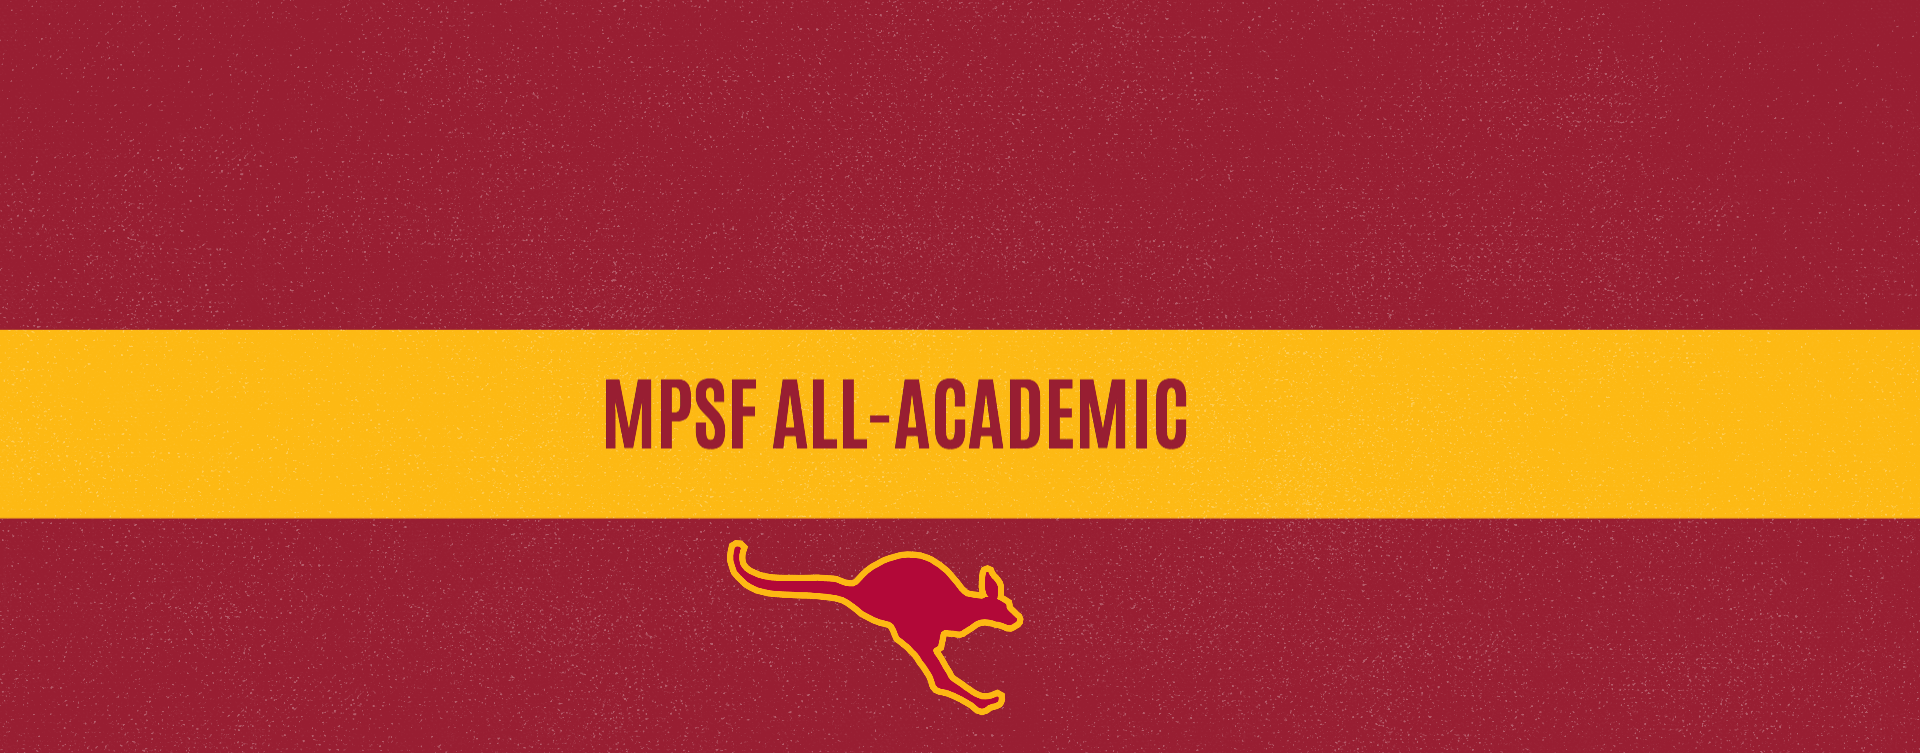 Nine From Men's Water Polo Earn MPSF Academic Honors